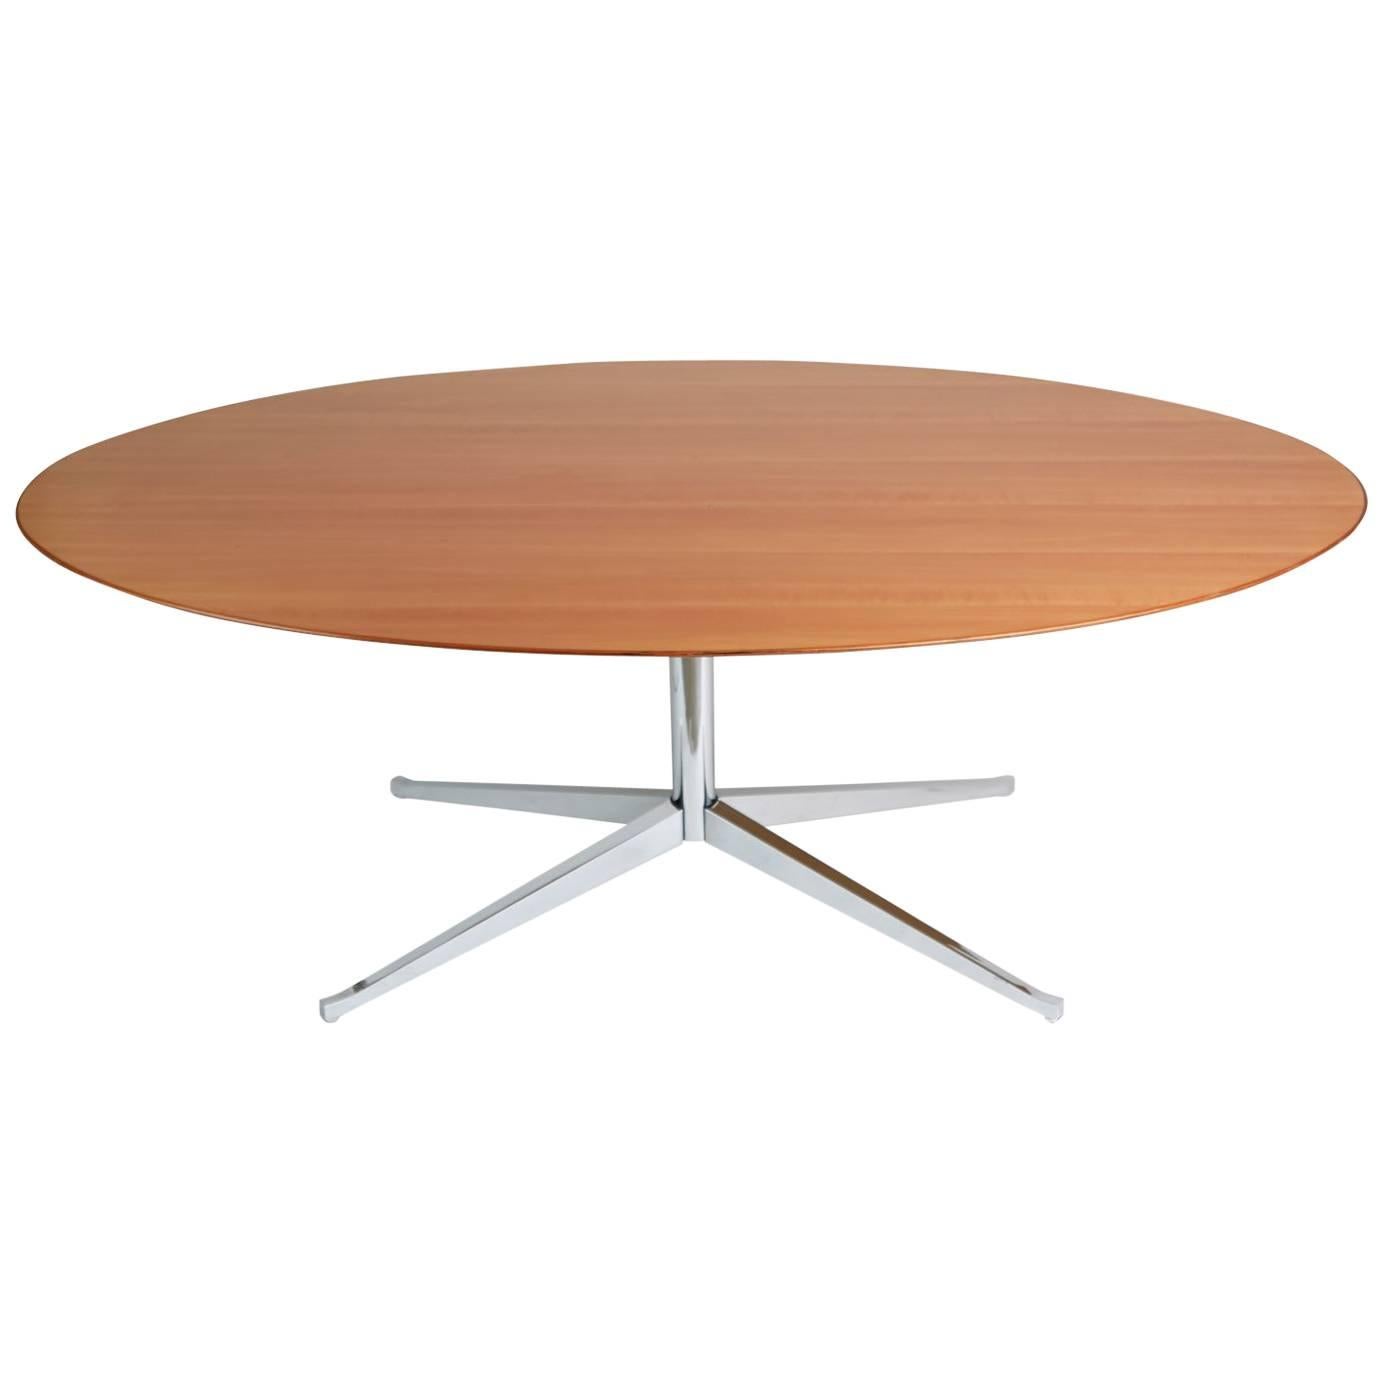 Florence Knoll Pearwood and Chrome Conference or Dining Table